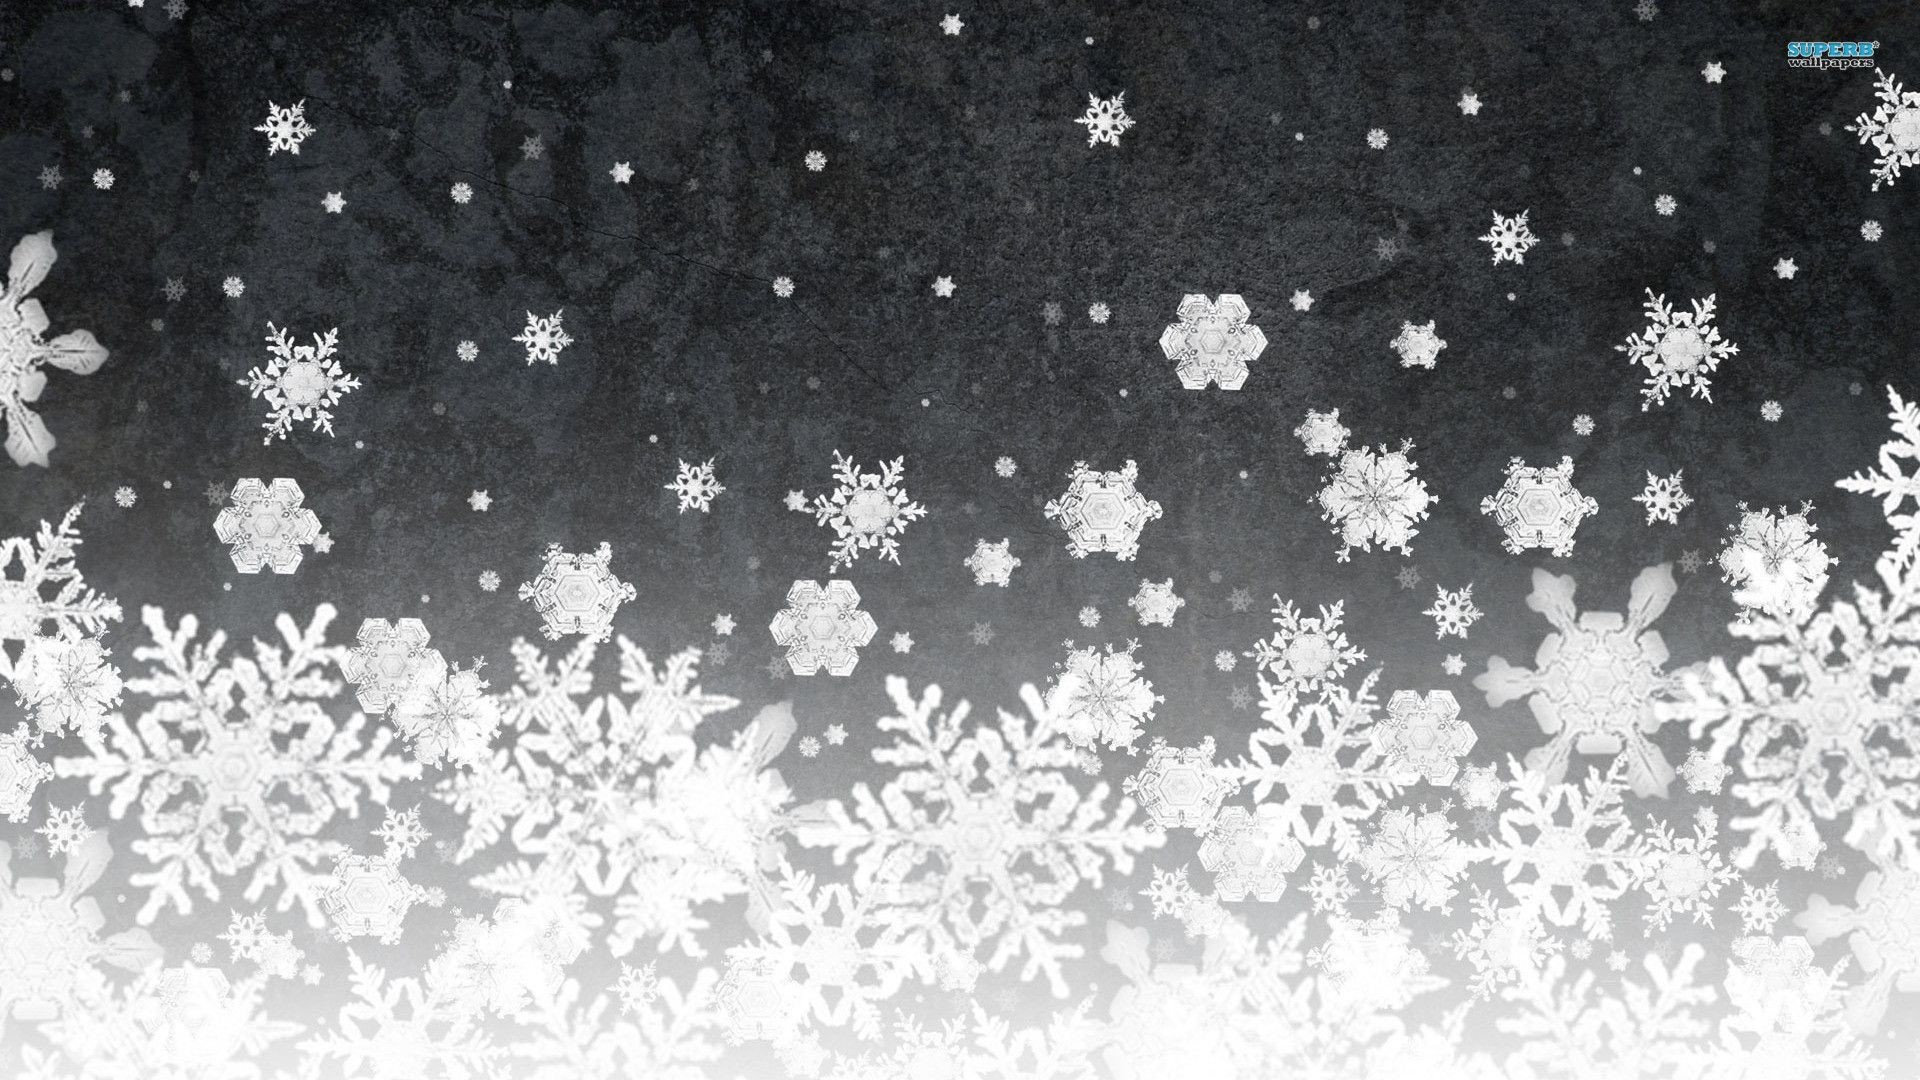 1920x1080 Pictures Of Snowflakes Wallpapers (47 Wallpapers) – Adorable Wallpapers